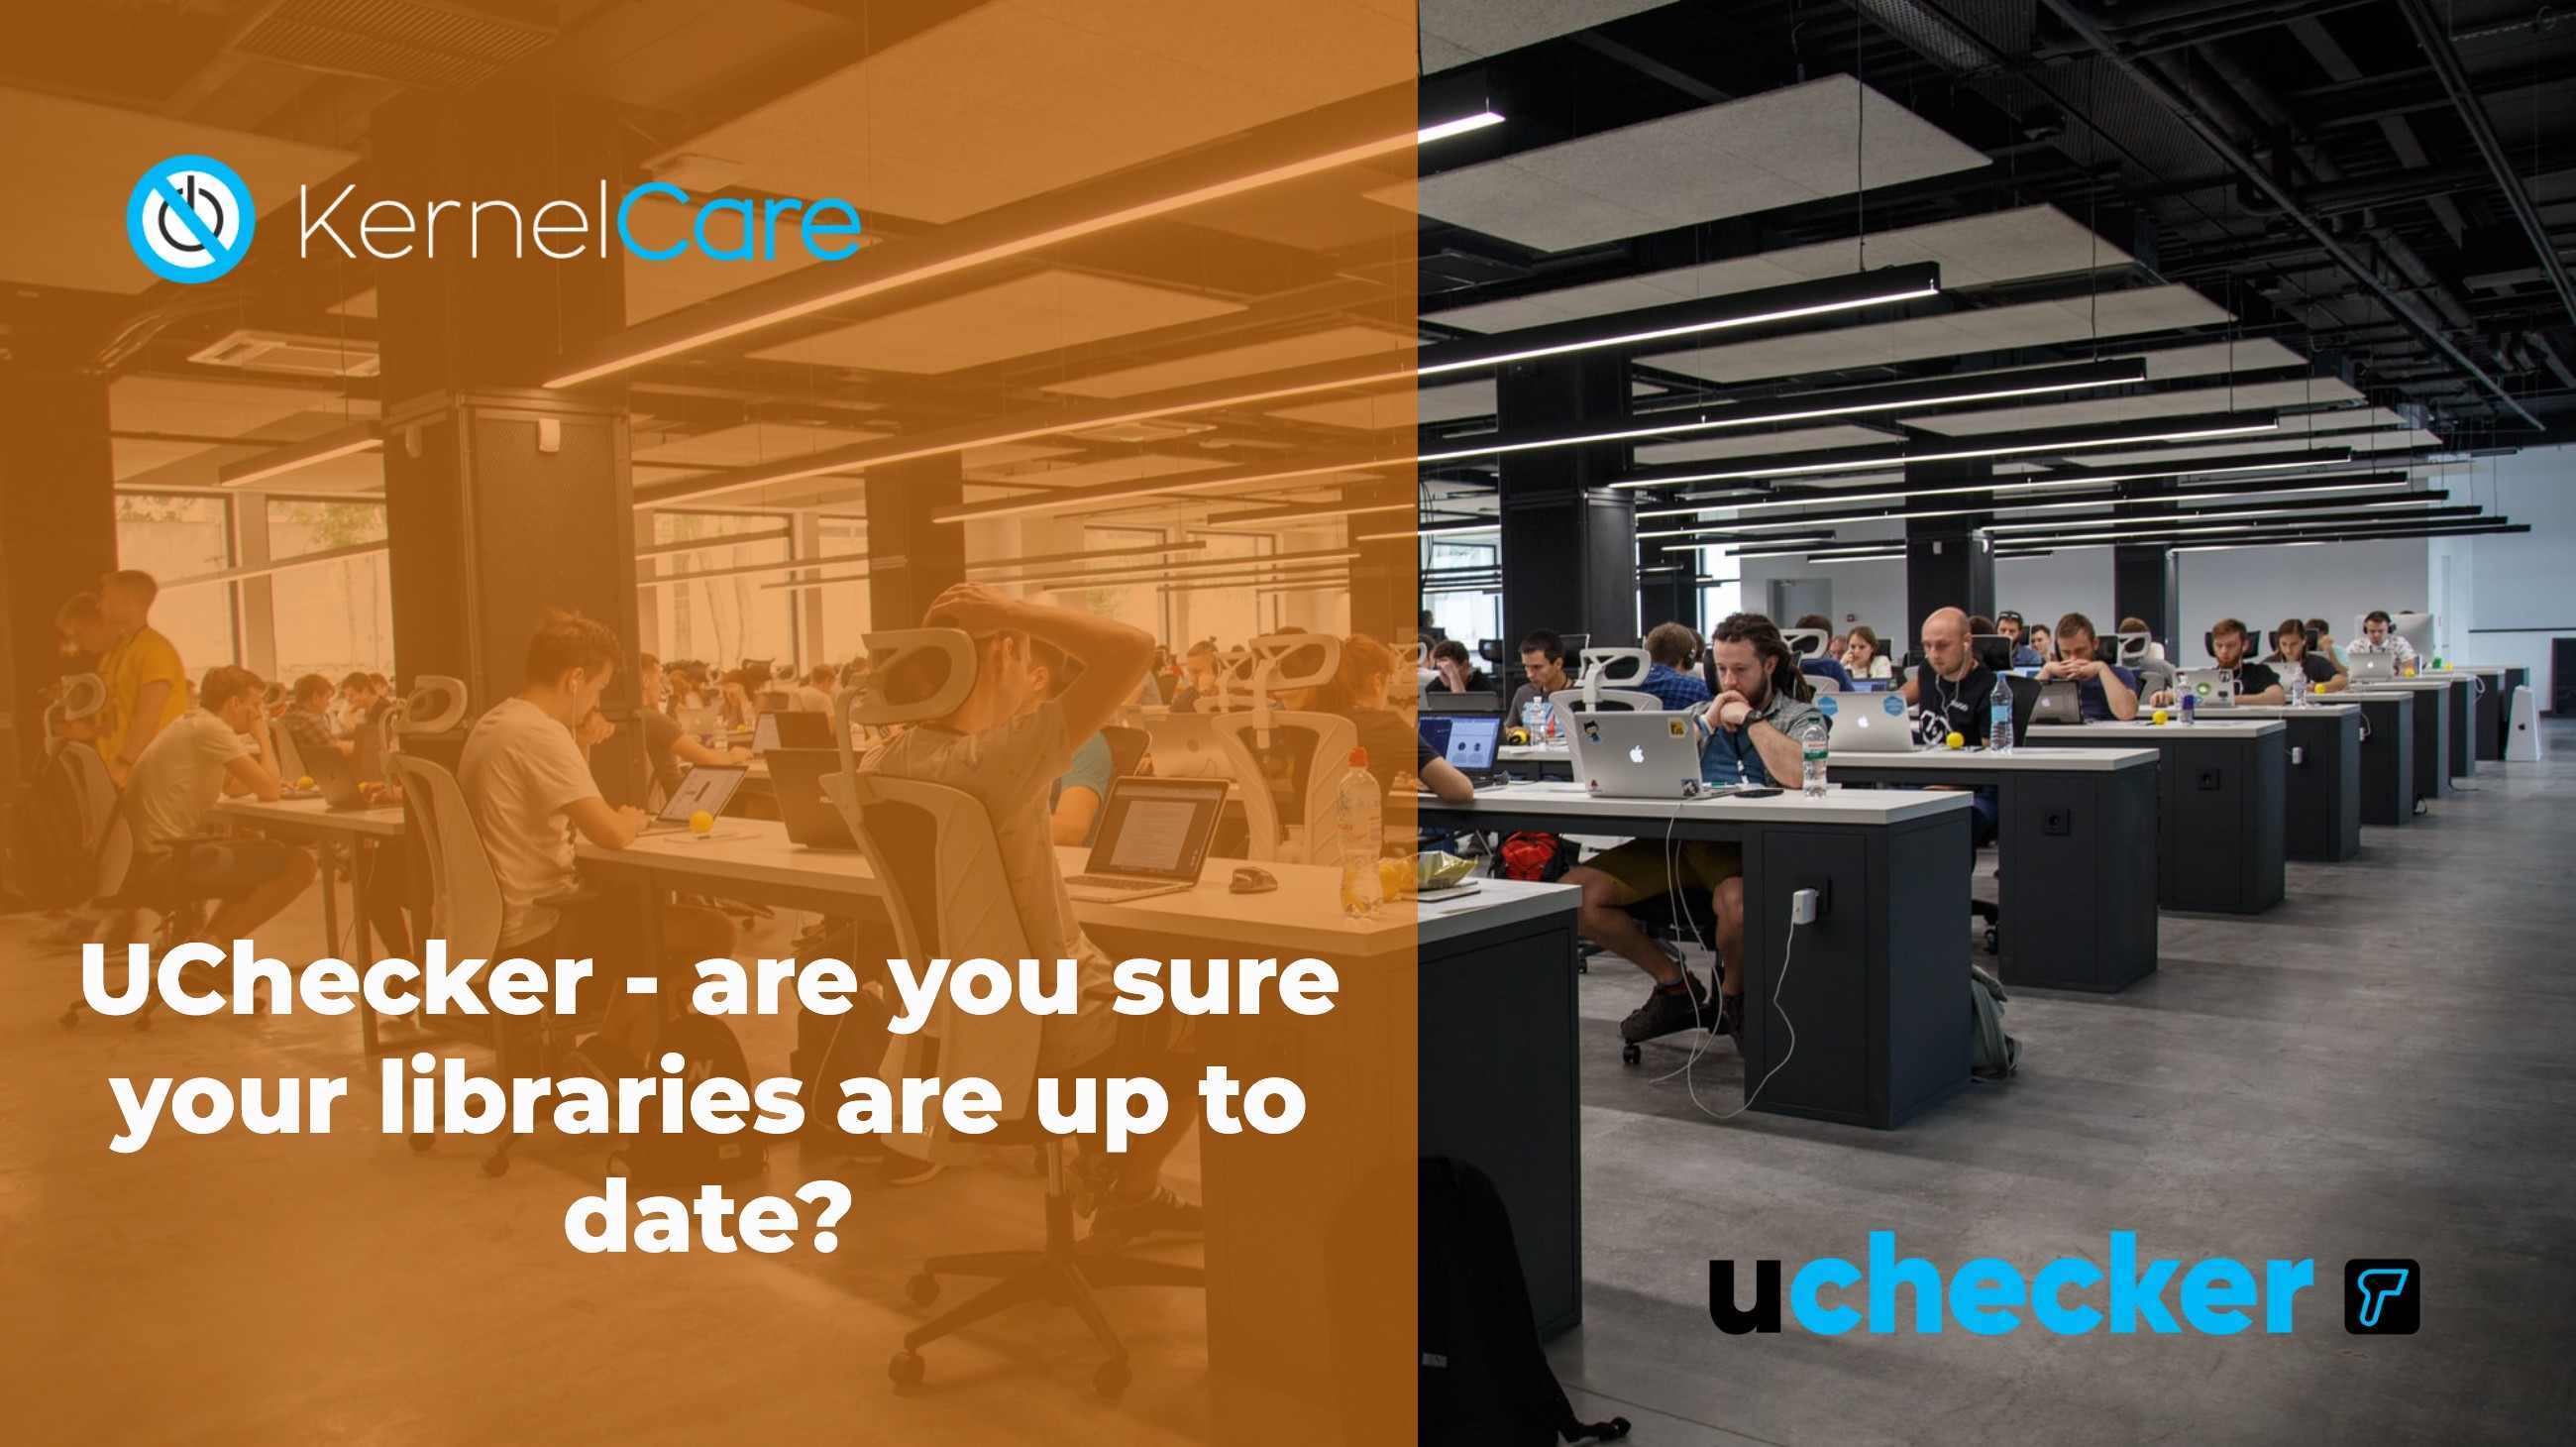 UChecker - are you sure your libraries are up to date?